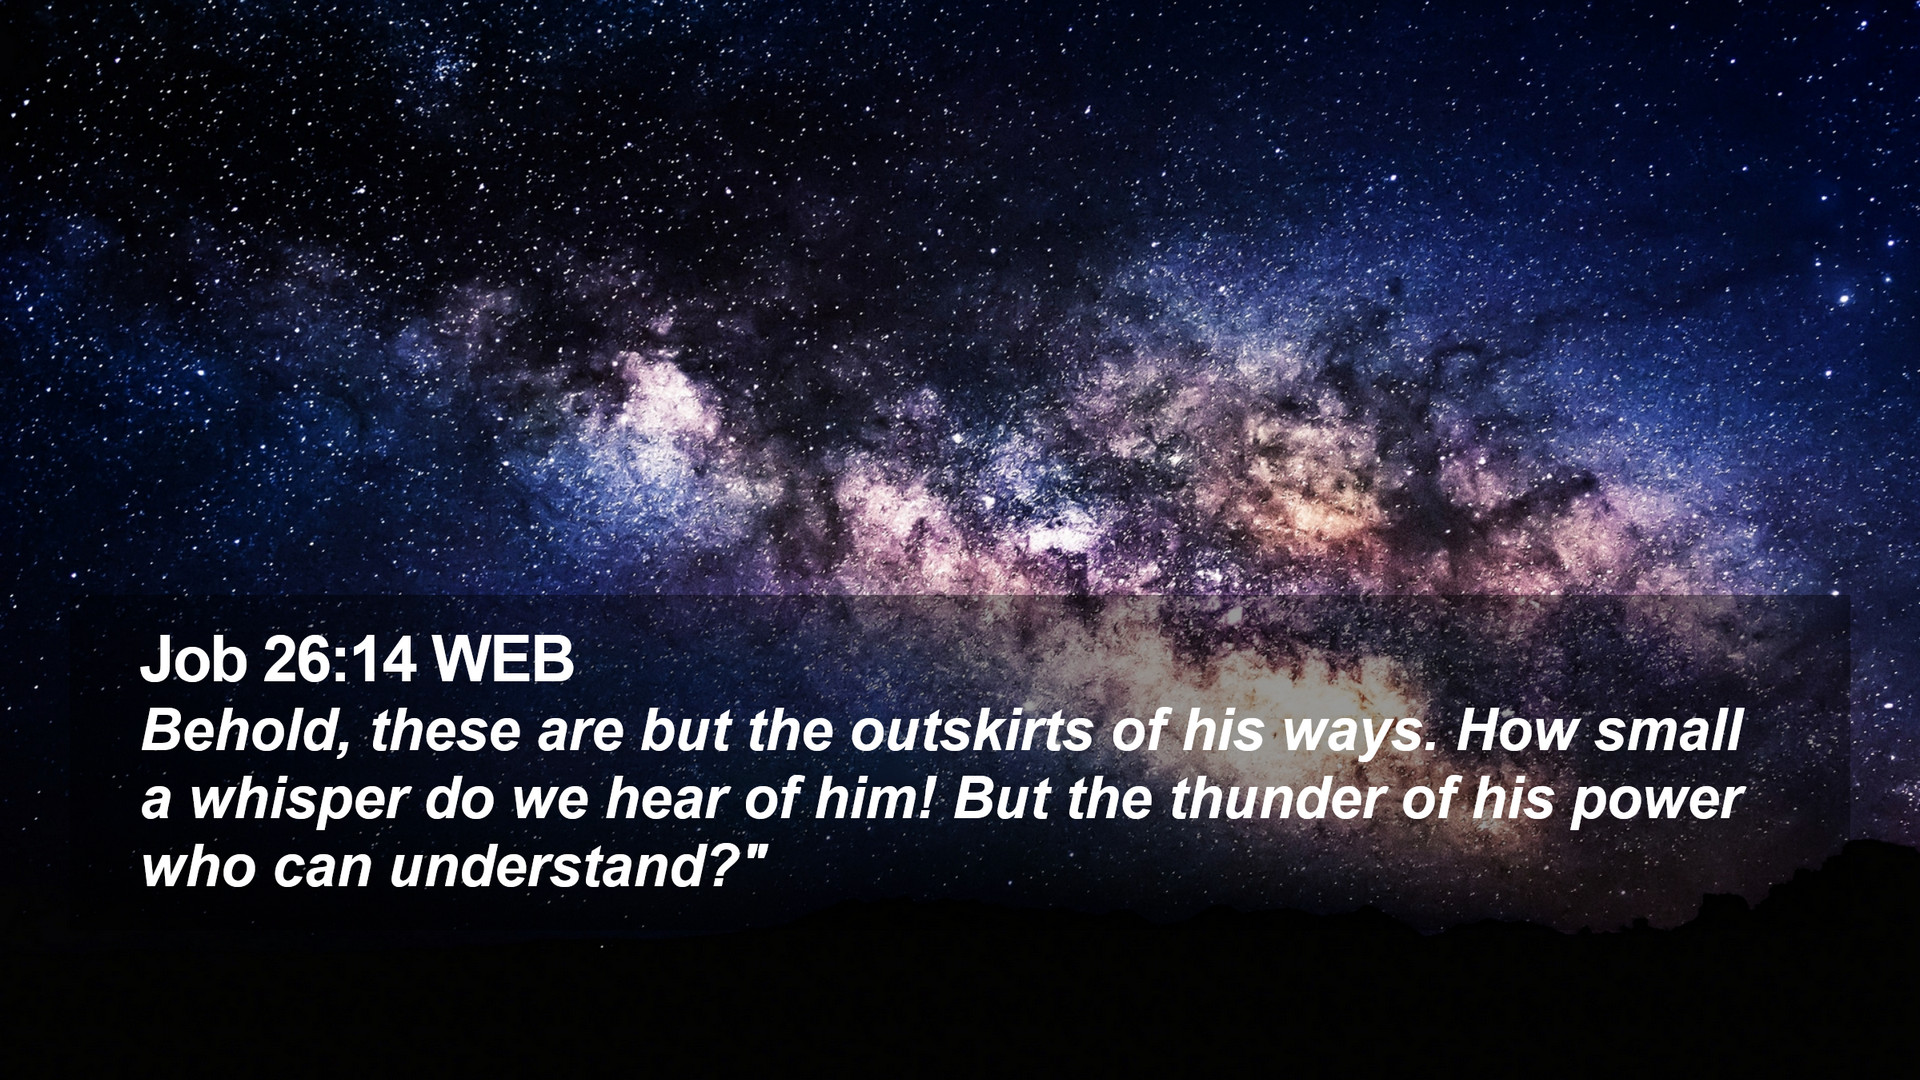 Job 26:14 WEB Desktop Wallpaper, these are but the outskirts of his ways